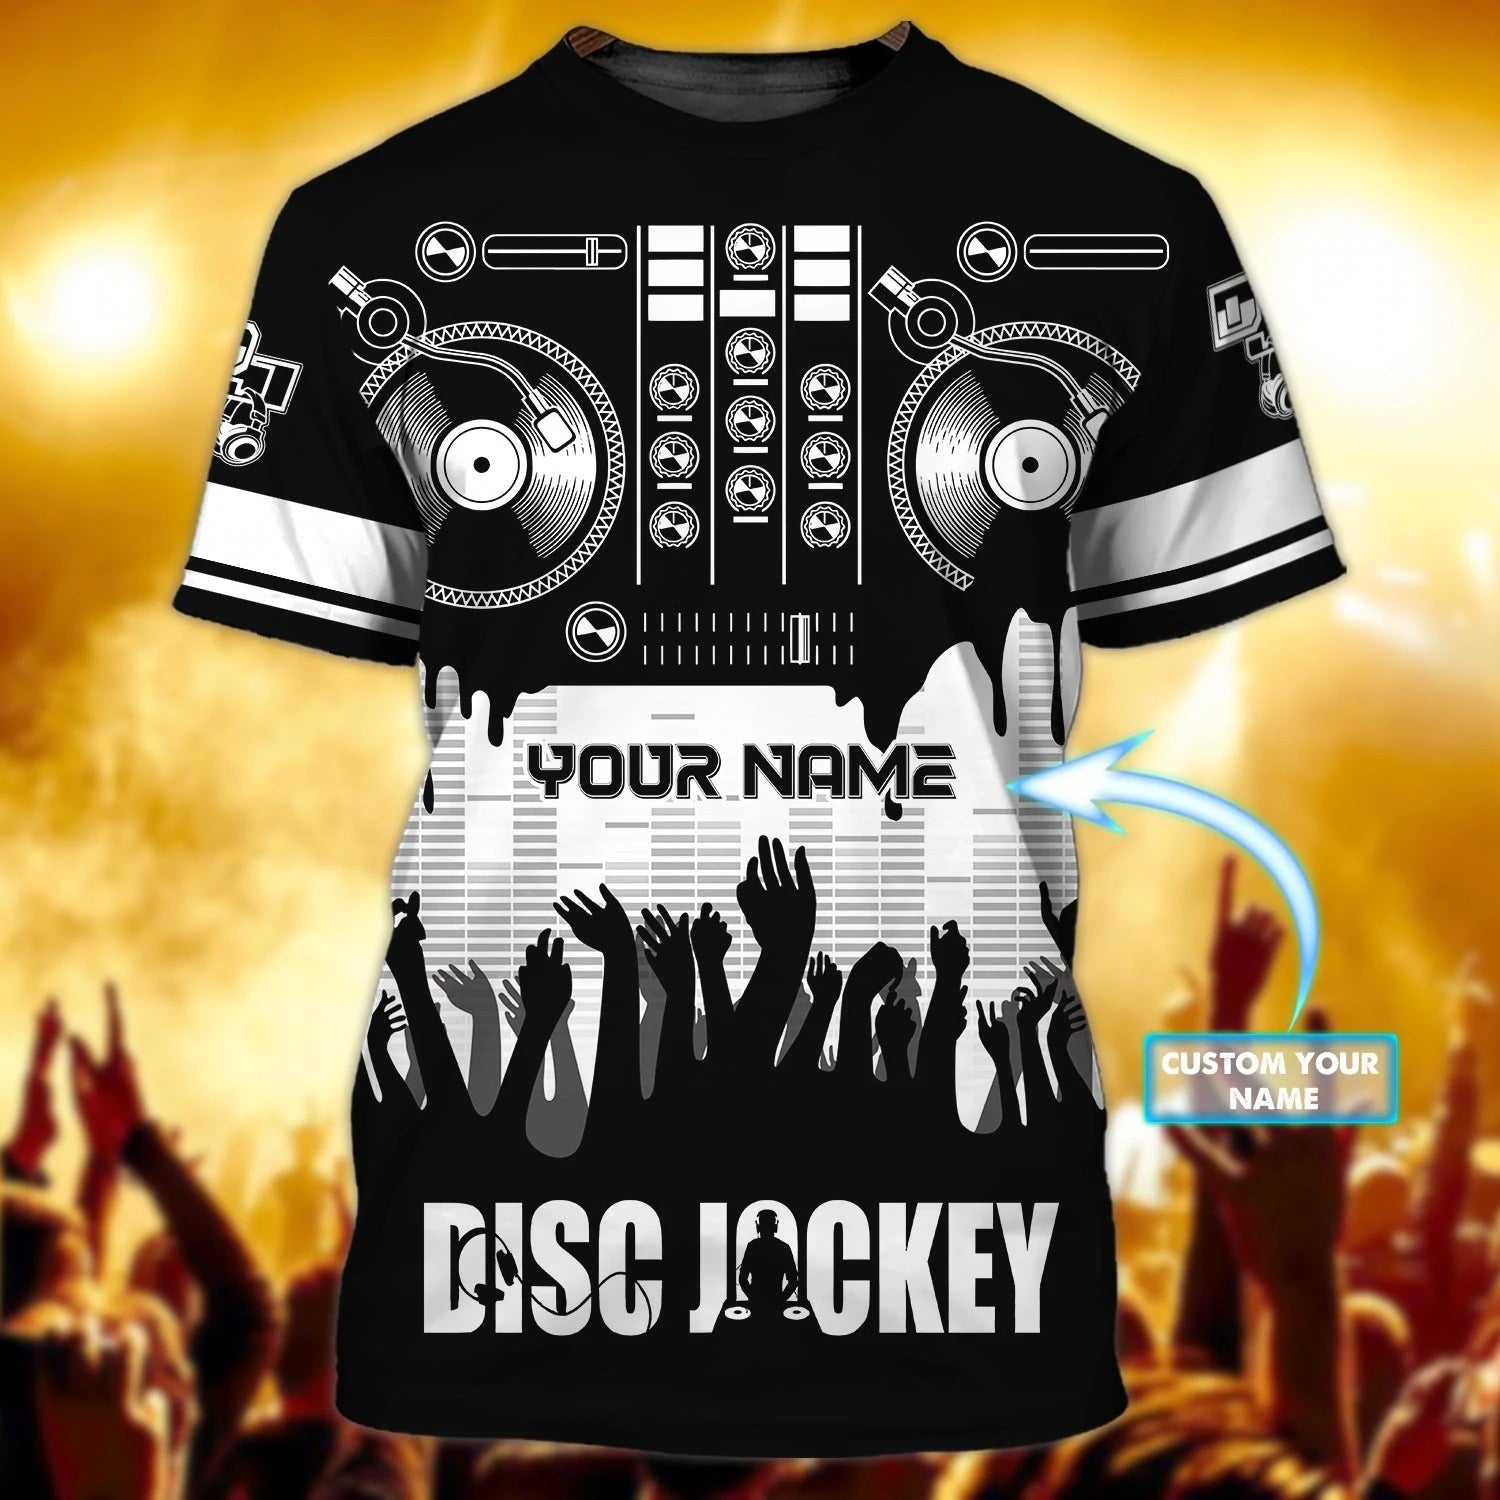 Customized With Name 3D All Over Printed Dj Shirt/ Disc Jockey Shirts/ Dj Gift For Him Her/ Present To A Dj